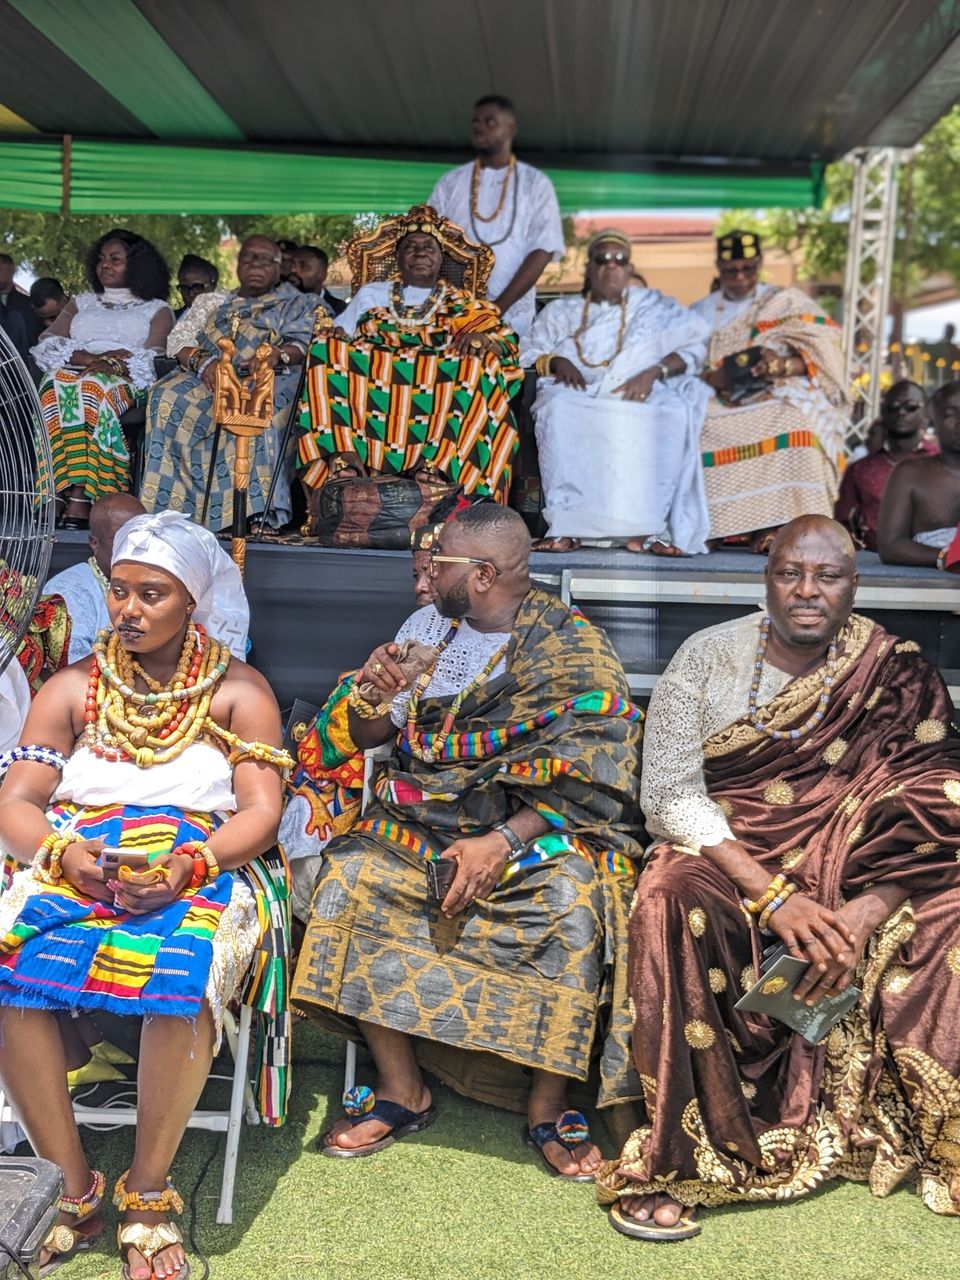 A section of the Anlo delegation featuring Togbe Sri III, ruler of the Anlo people of the Volta region of Ghana. The delegation was at the Adaekese festival at the Manhyia palace in Kumase. The Asante King received many visitors from all over the country as the festival coincided with celebrations for his 25th year as the King of the Asante people.